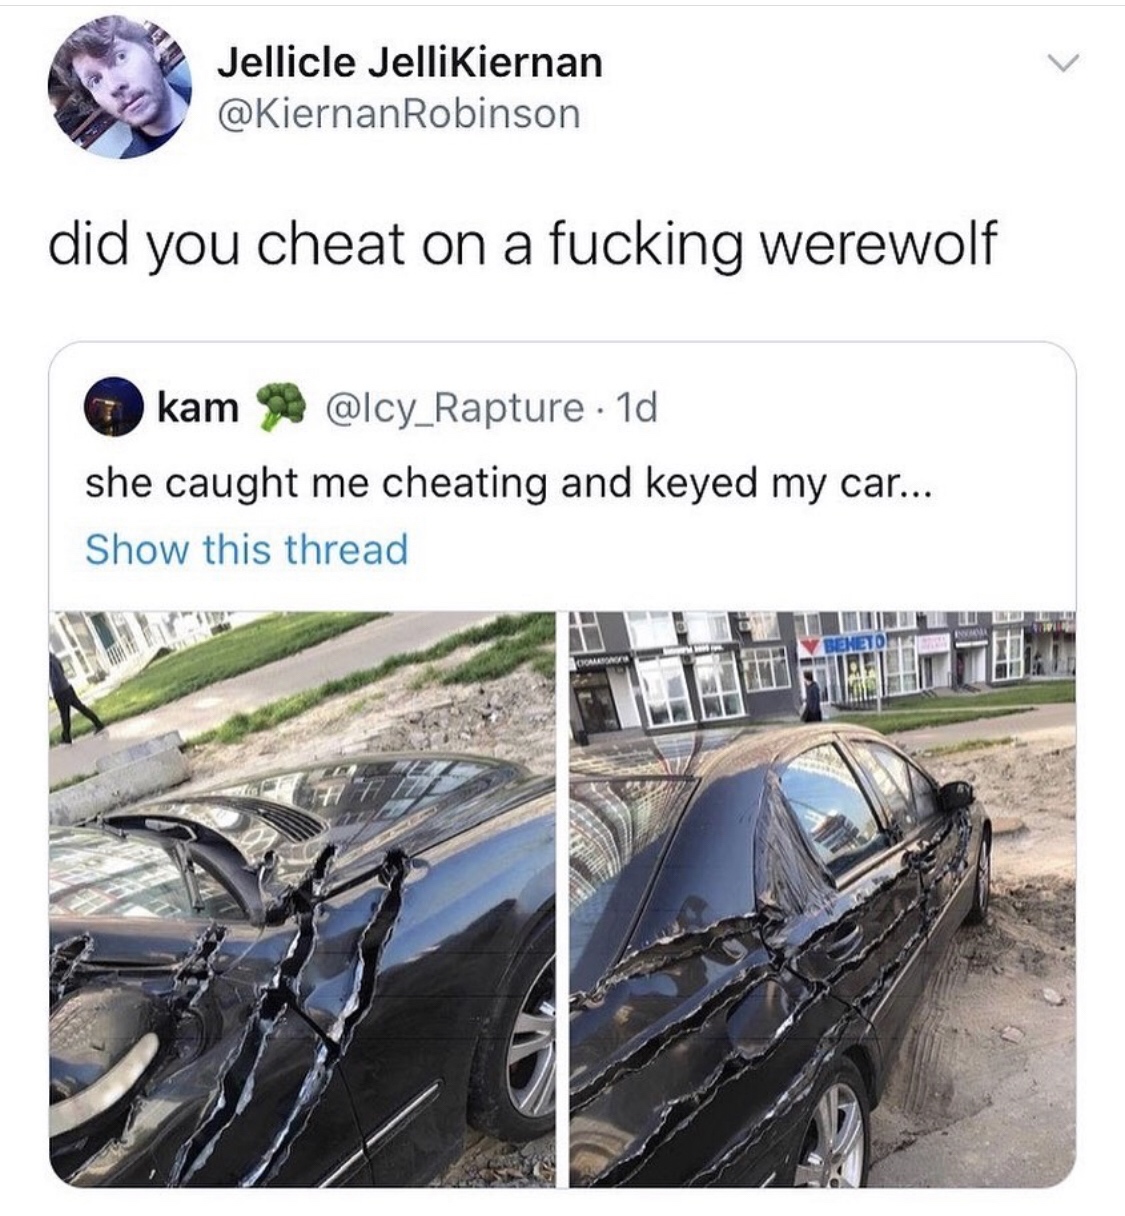 werewolf gf - Jellicle JelliKiernan did you cheat on a fucking werewolf kam 1d she caught me cheating and keyed my car... Show this thread